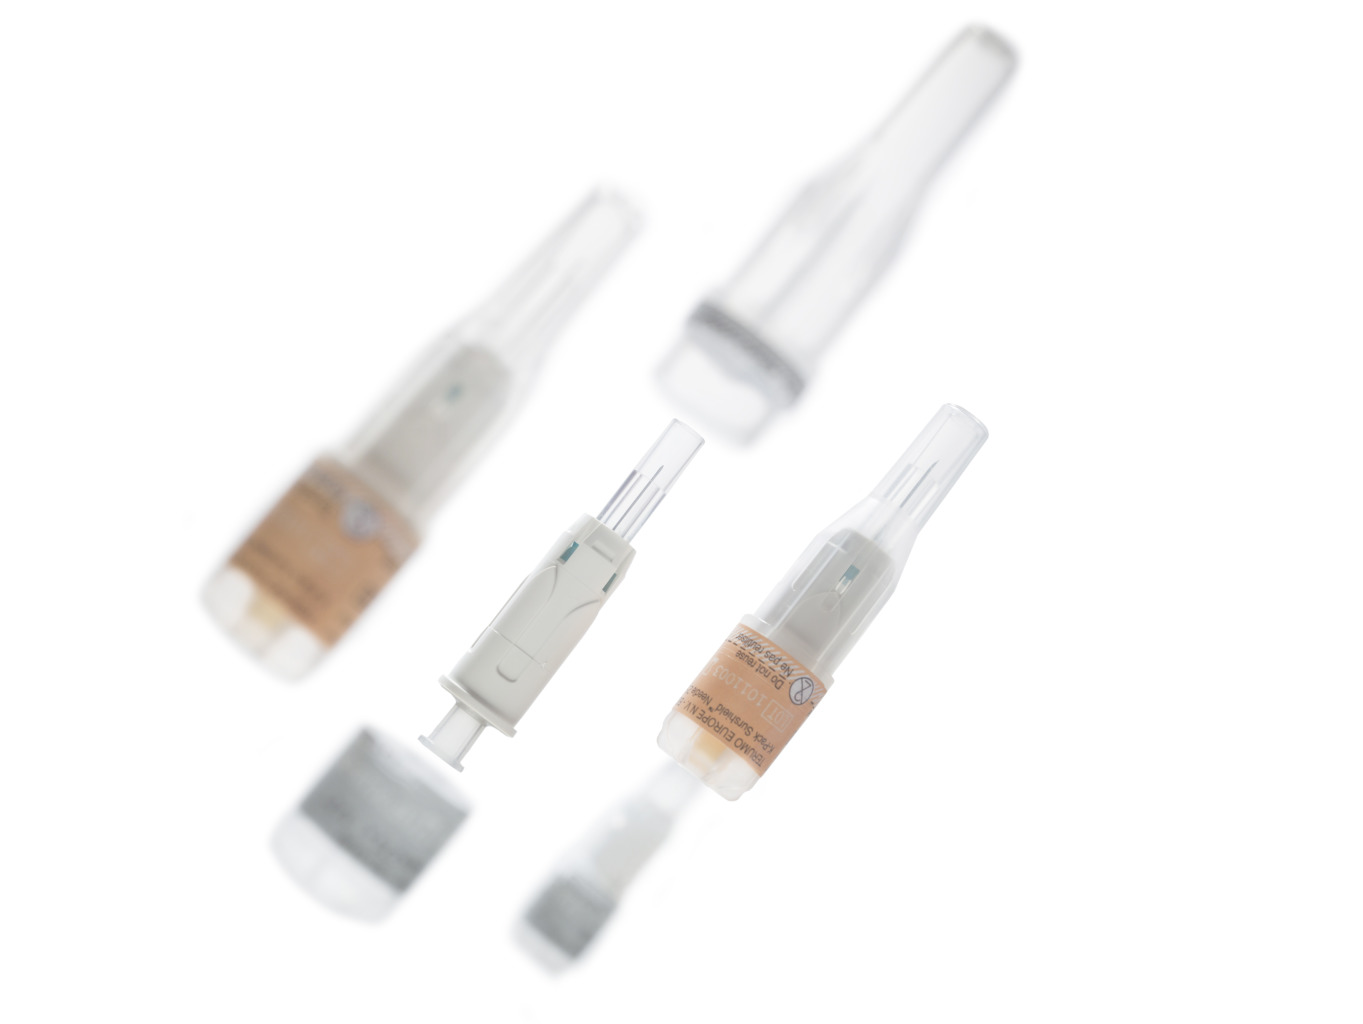 K-Pack™ Surshield™ Needles with passive sharps protection